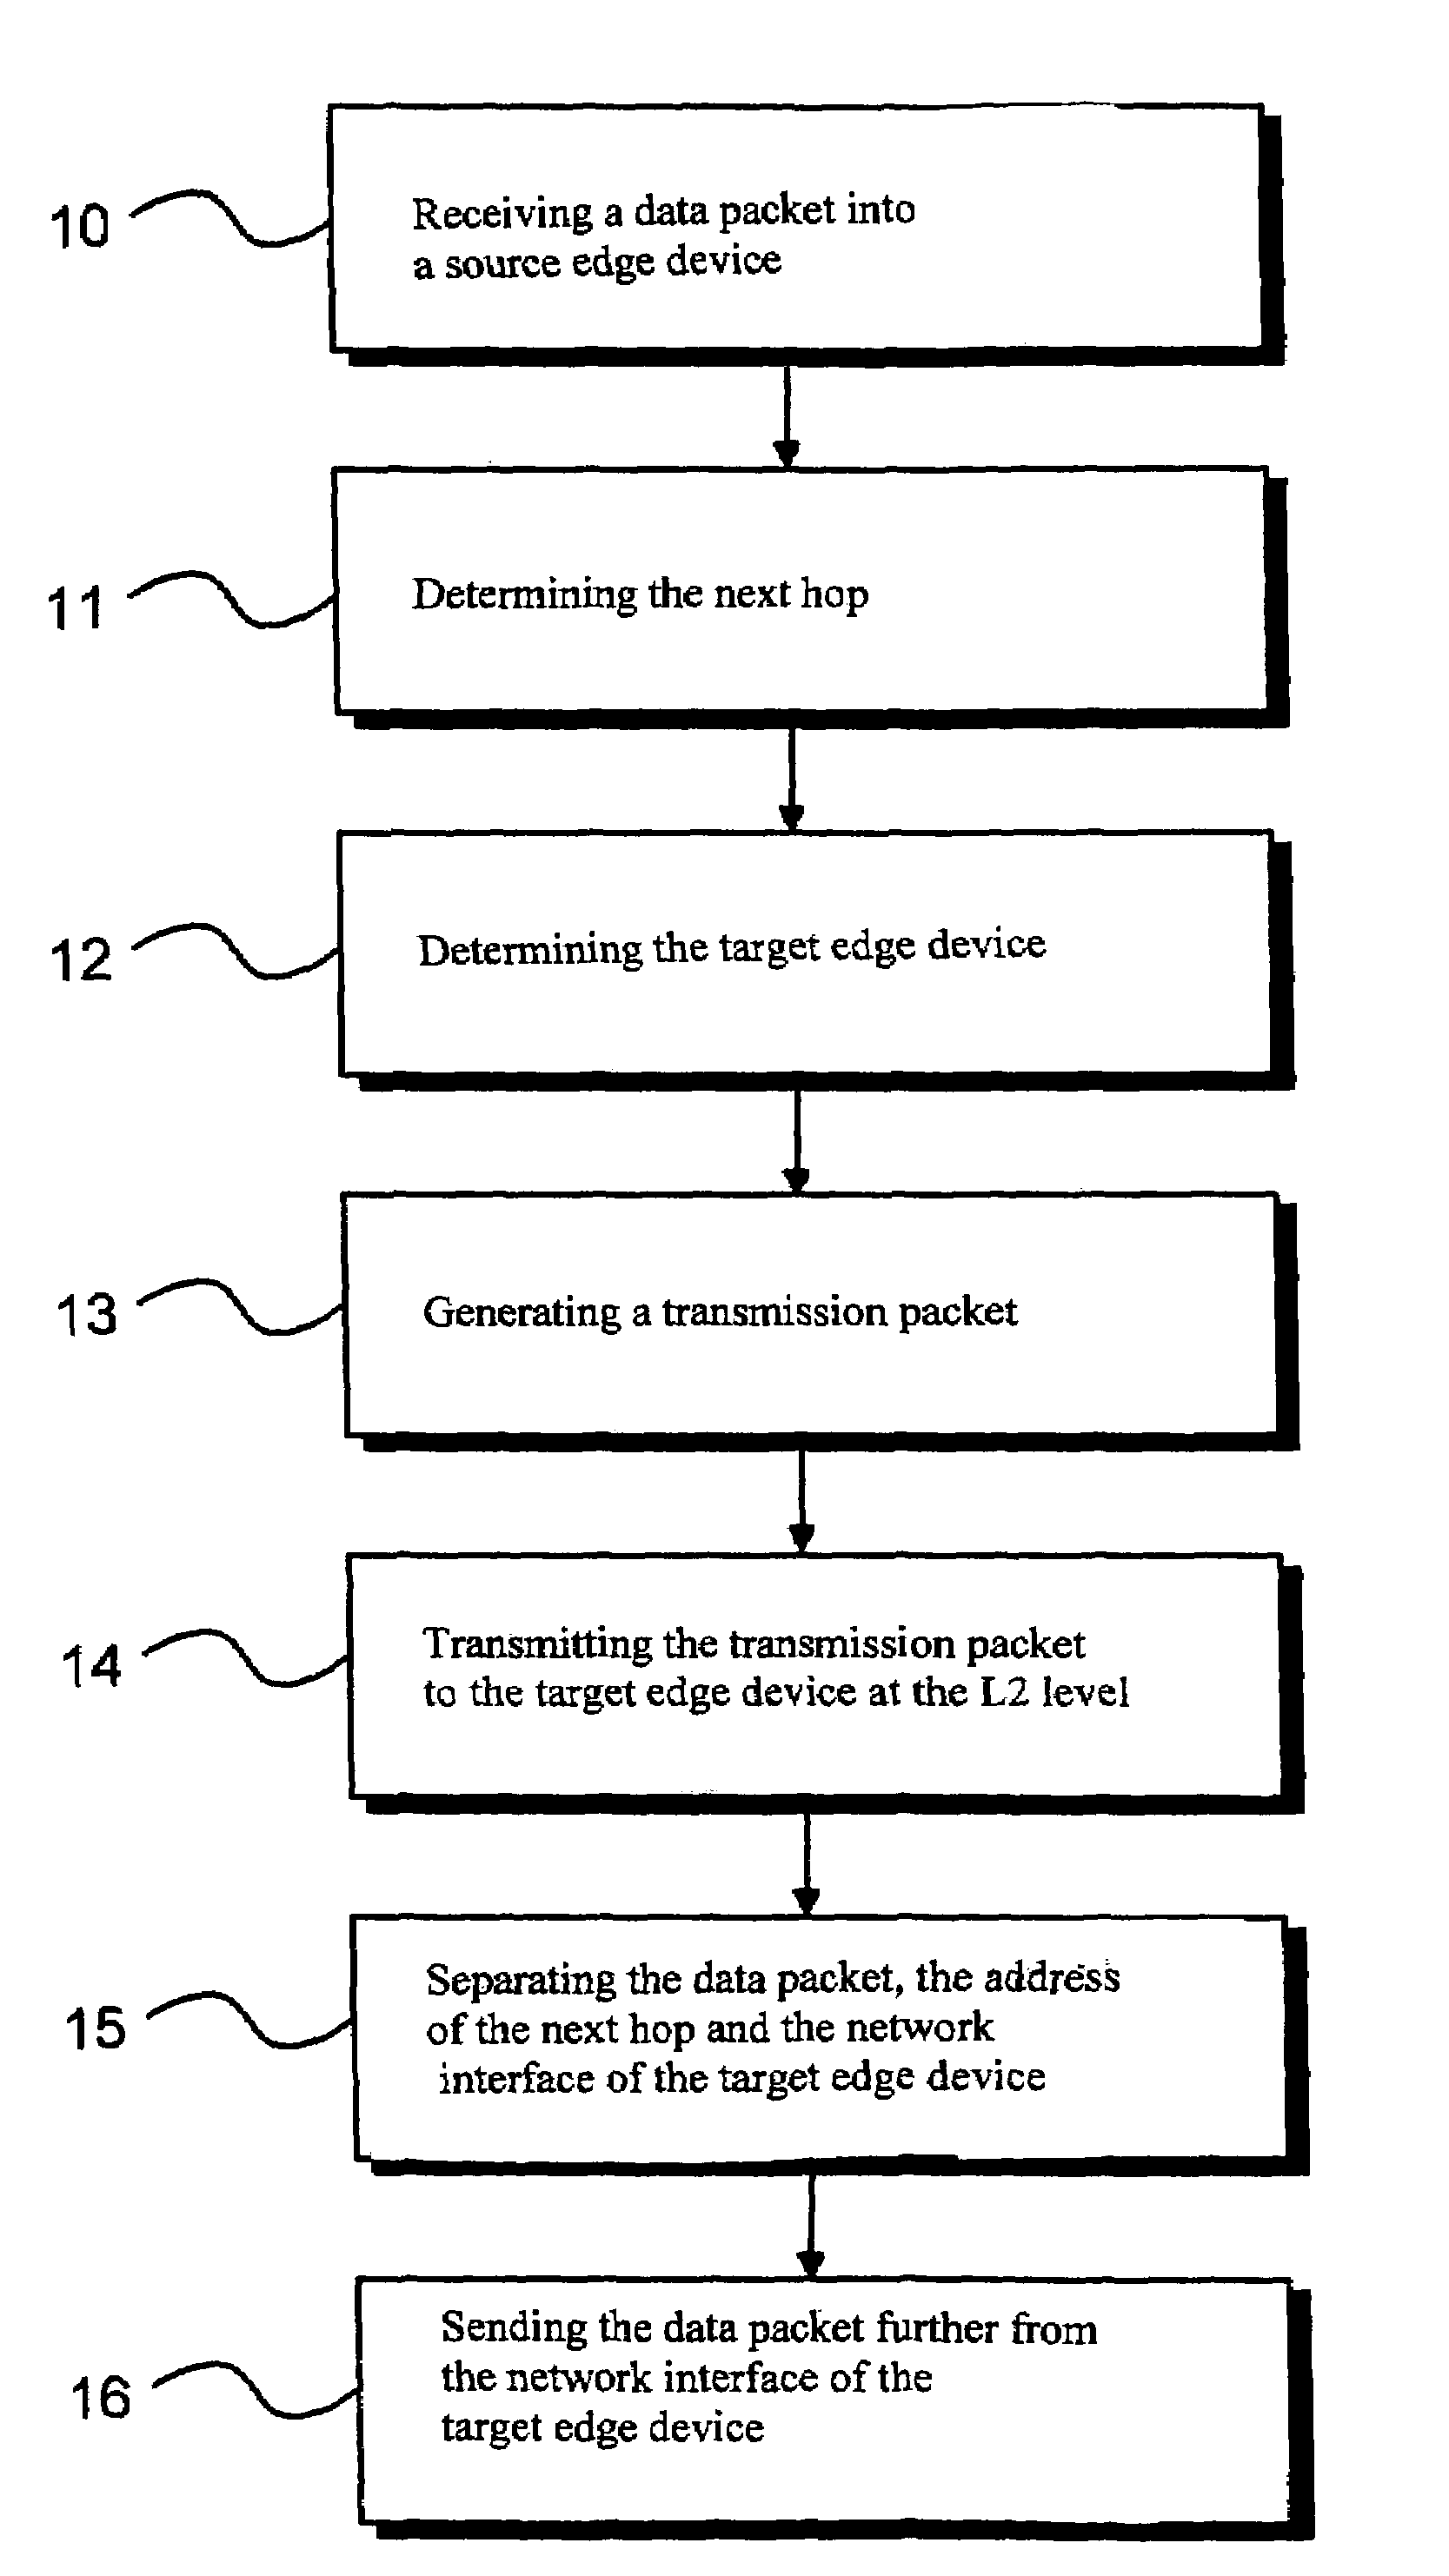 Distributed dynamic routing